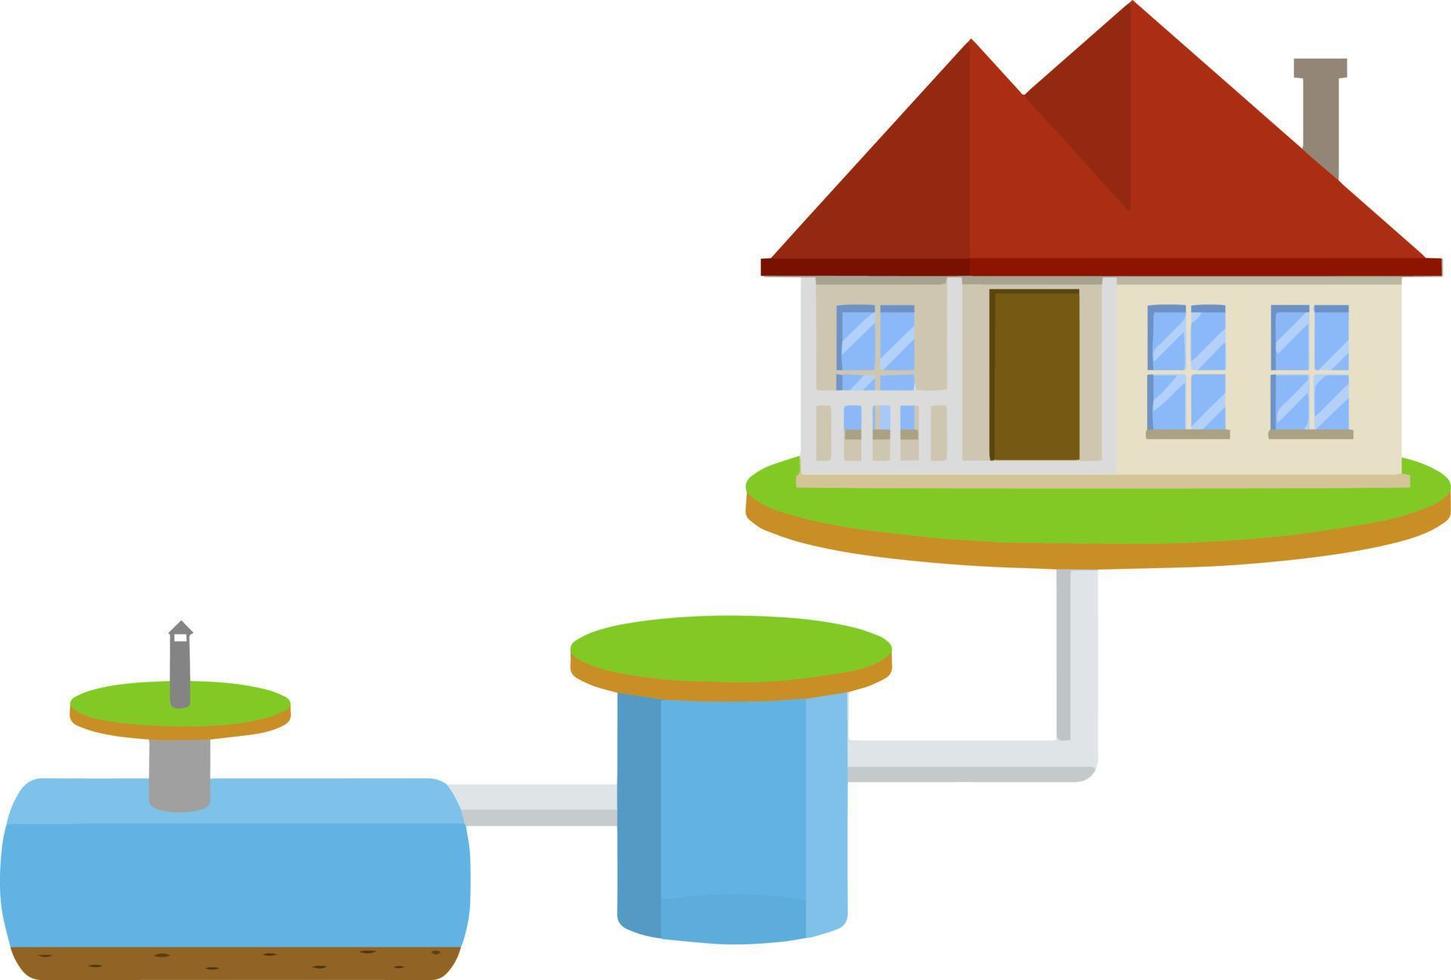 Scheme External network of suburban home sewage treatment system. house with red roof. Cartoon flat illustration. Pipe, septic tanks, drainage vector